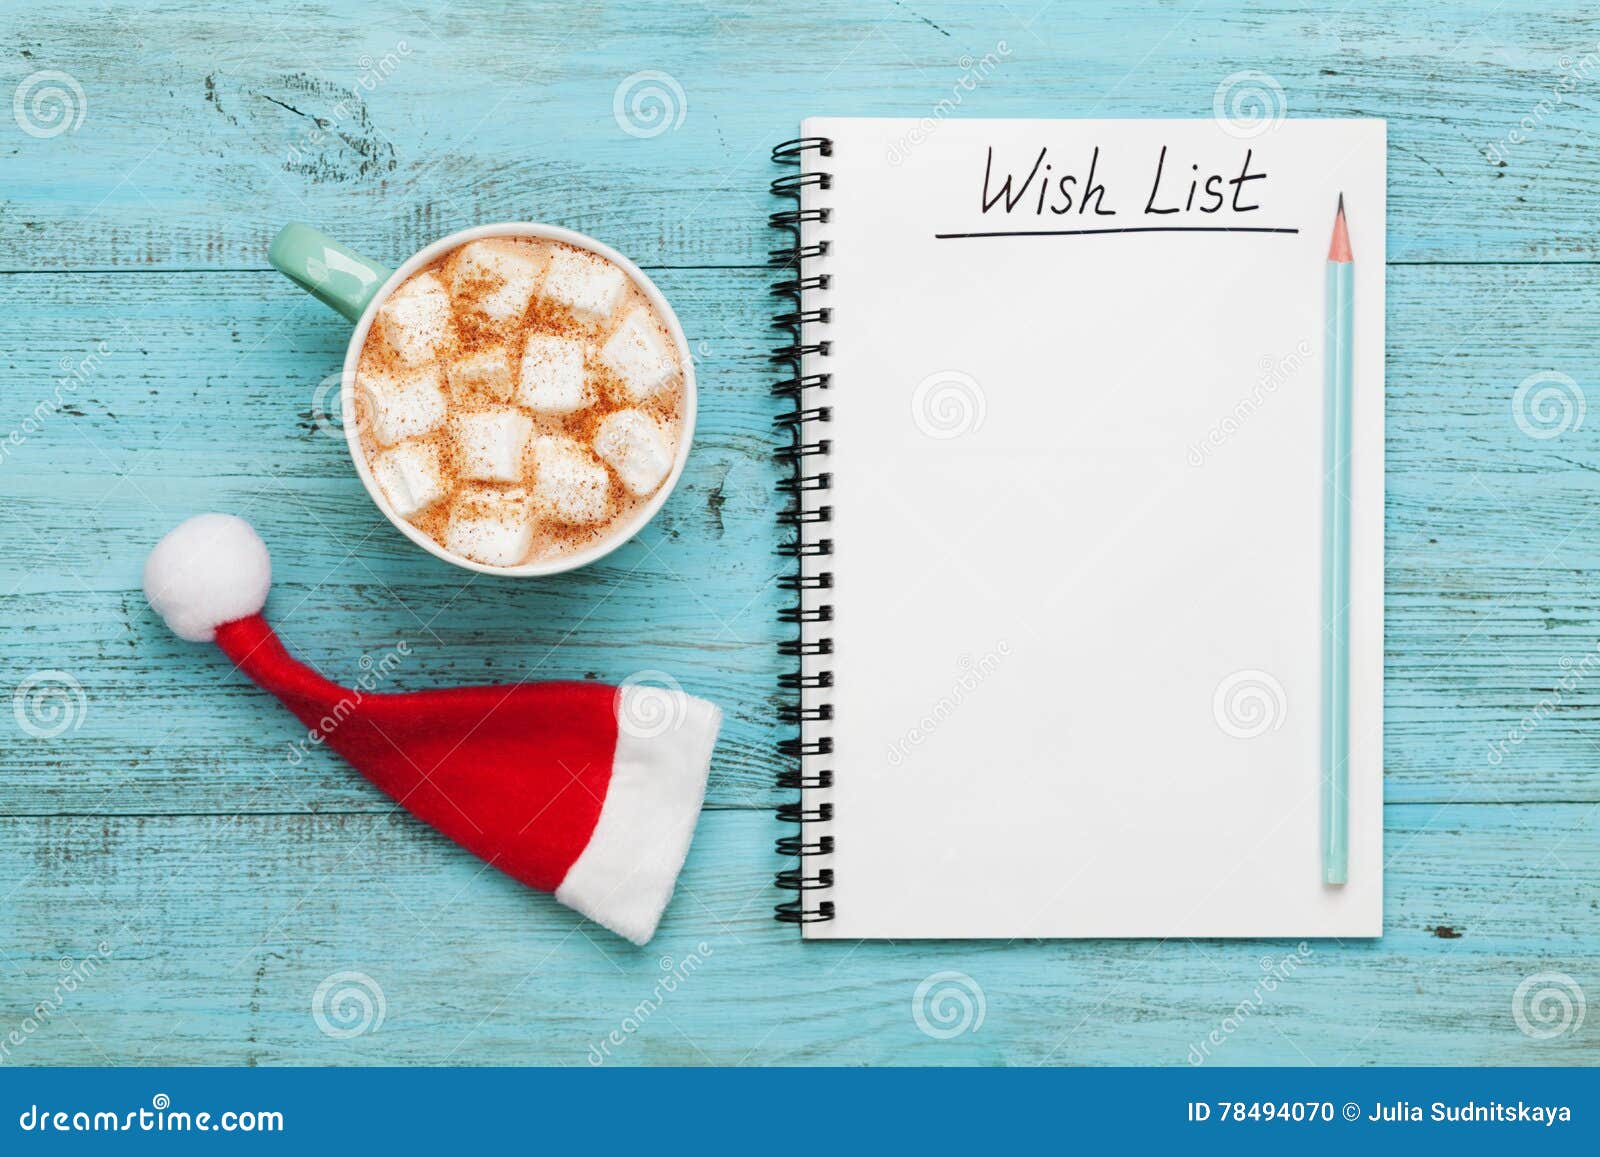 cup of hot cocoa or chocolate with marshmallow, santa claus hat and notebook with wish list, christmas planning concept. flat